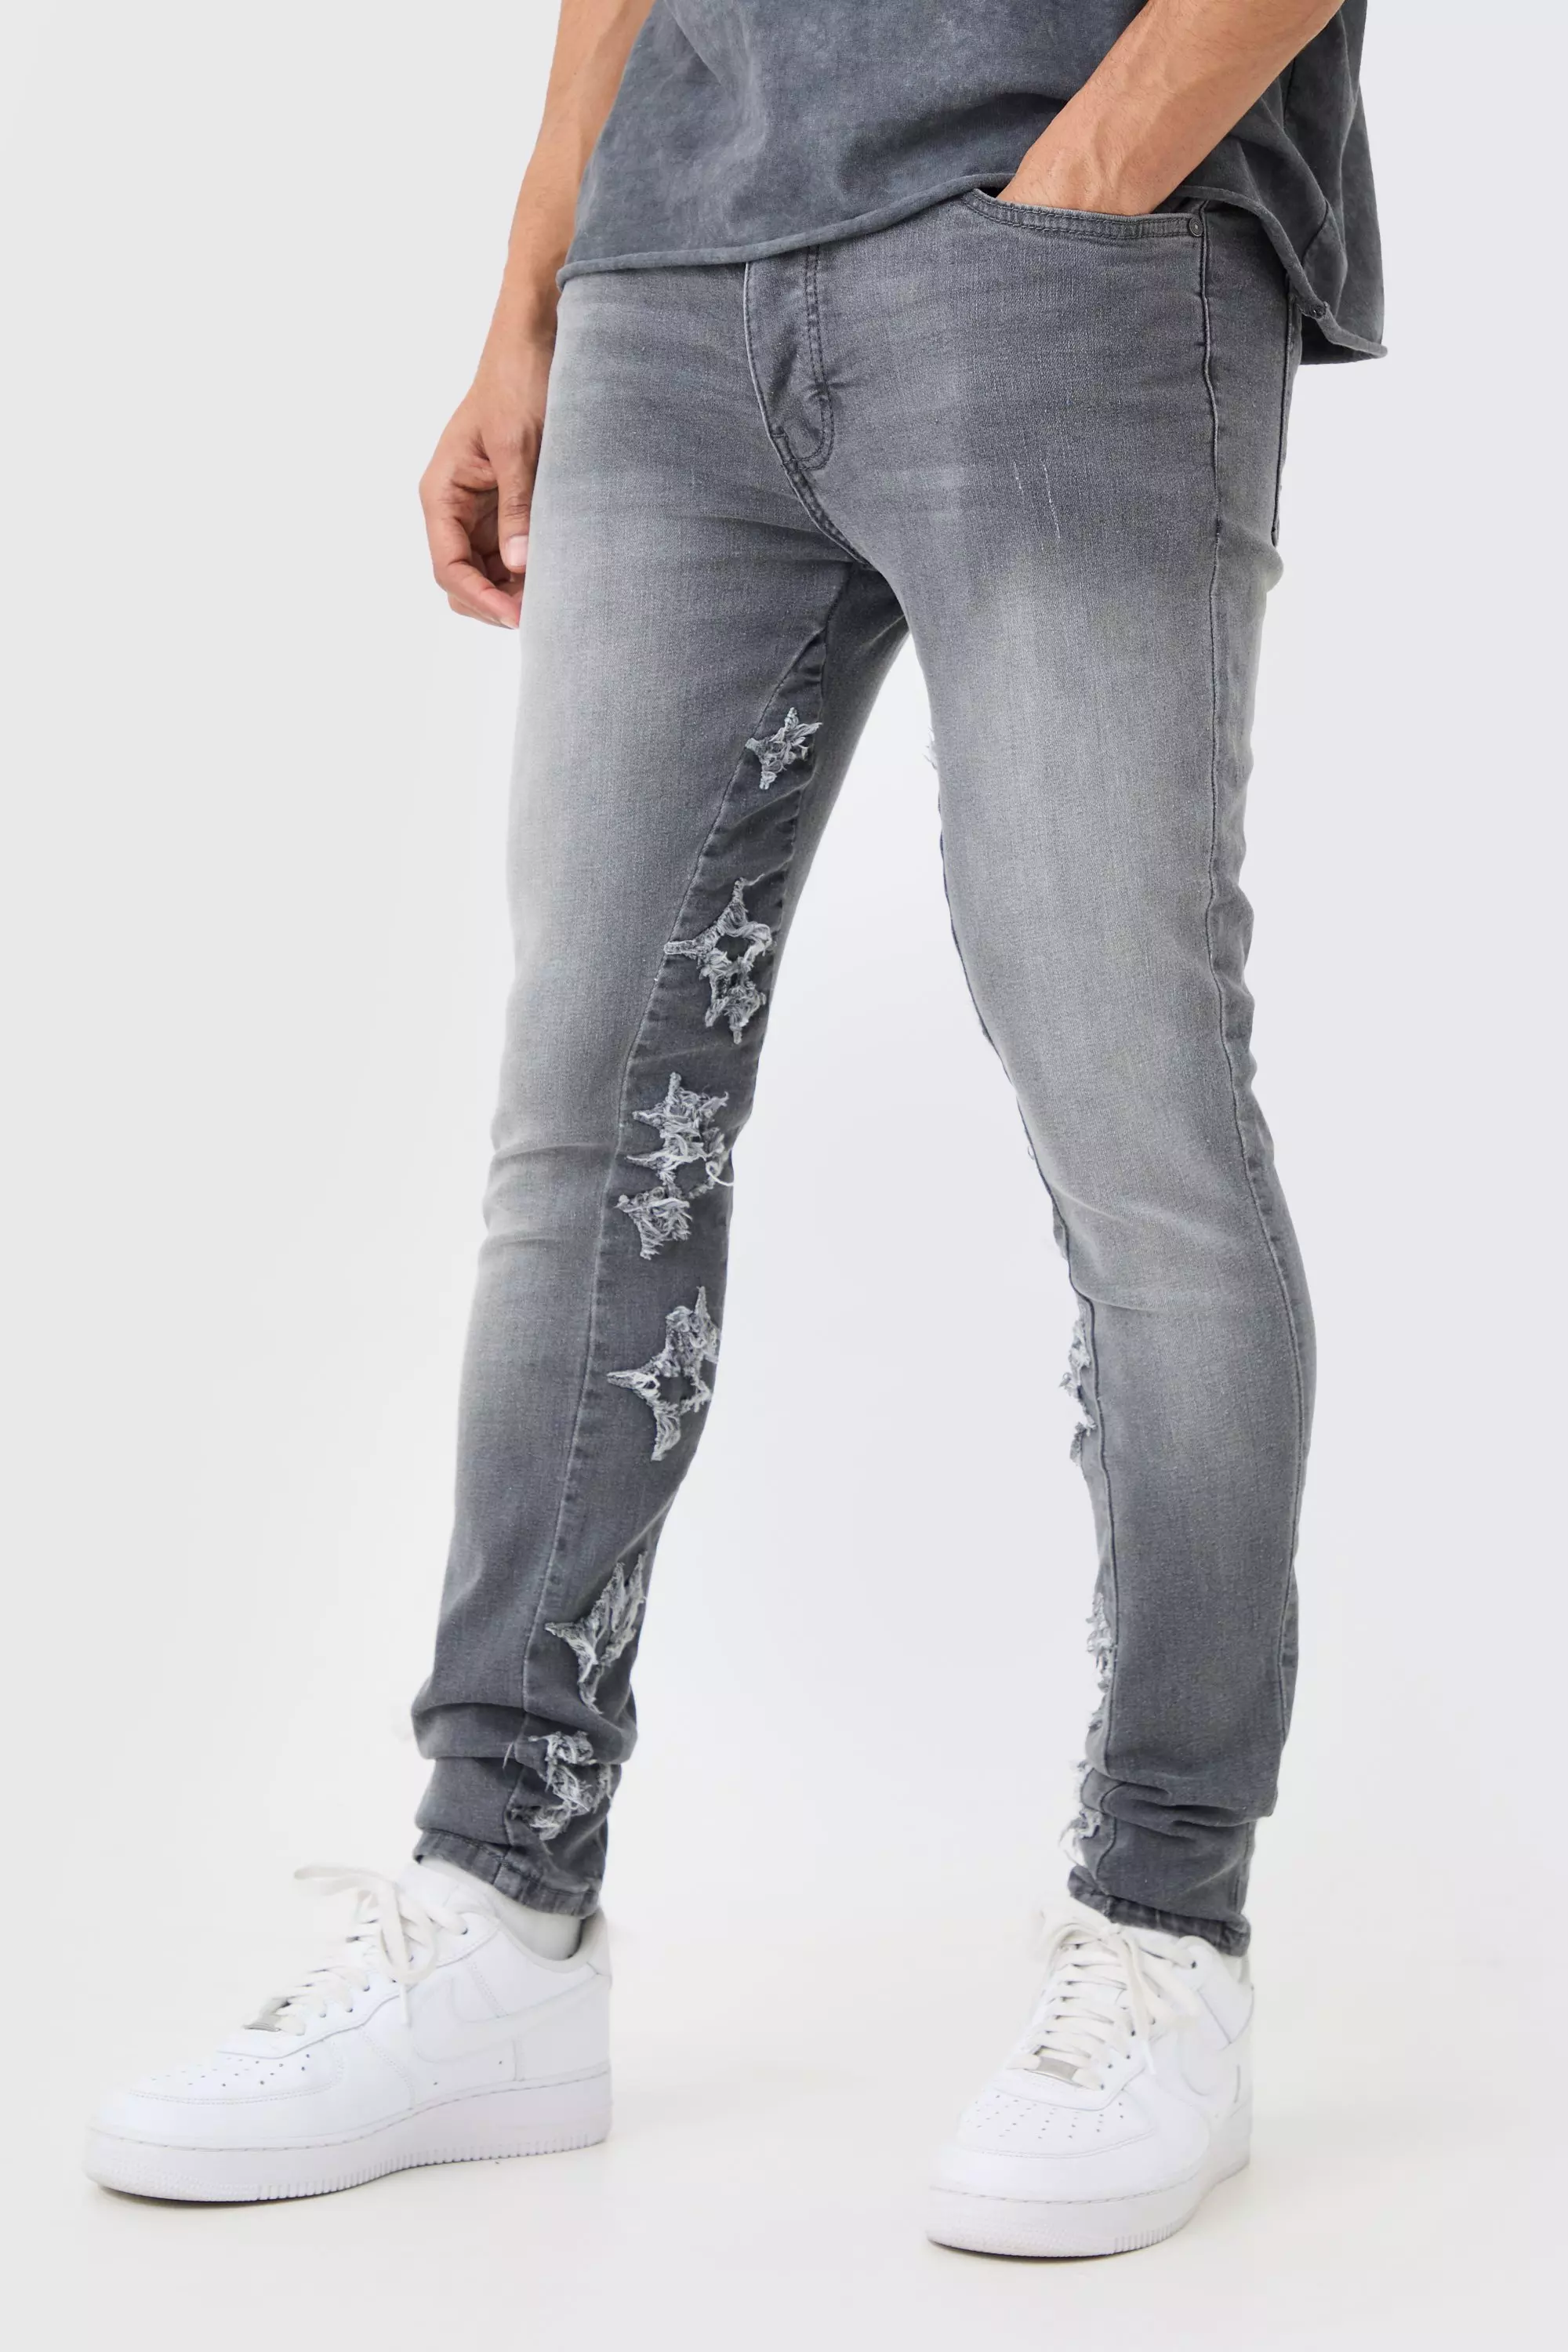 Grey Skinny Stretch Overdyed Applique Gusset Jeans In Grey